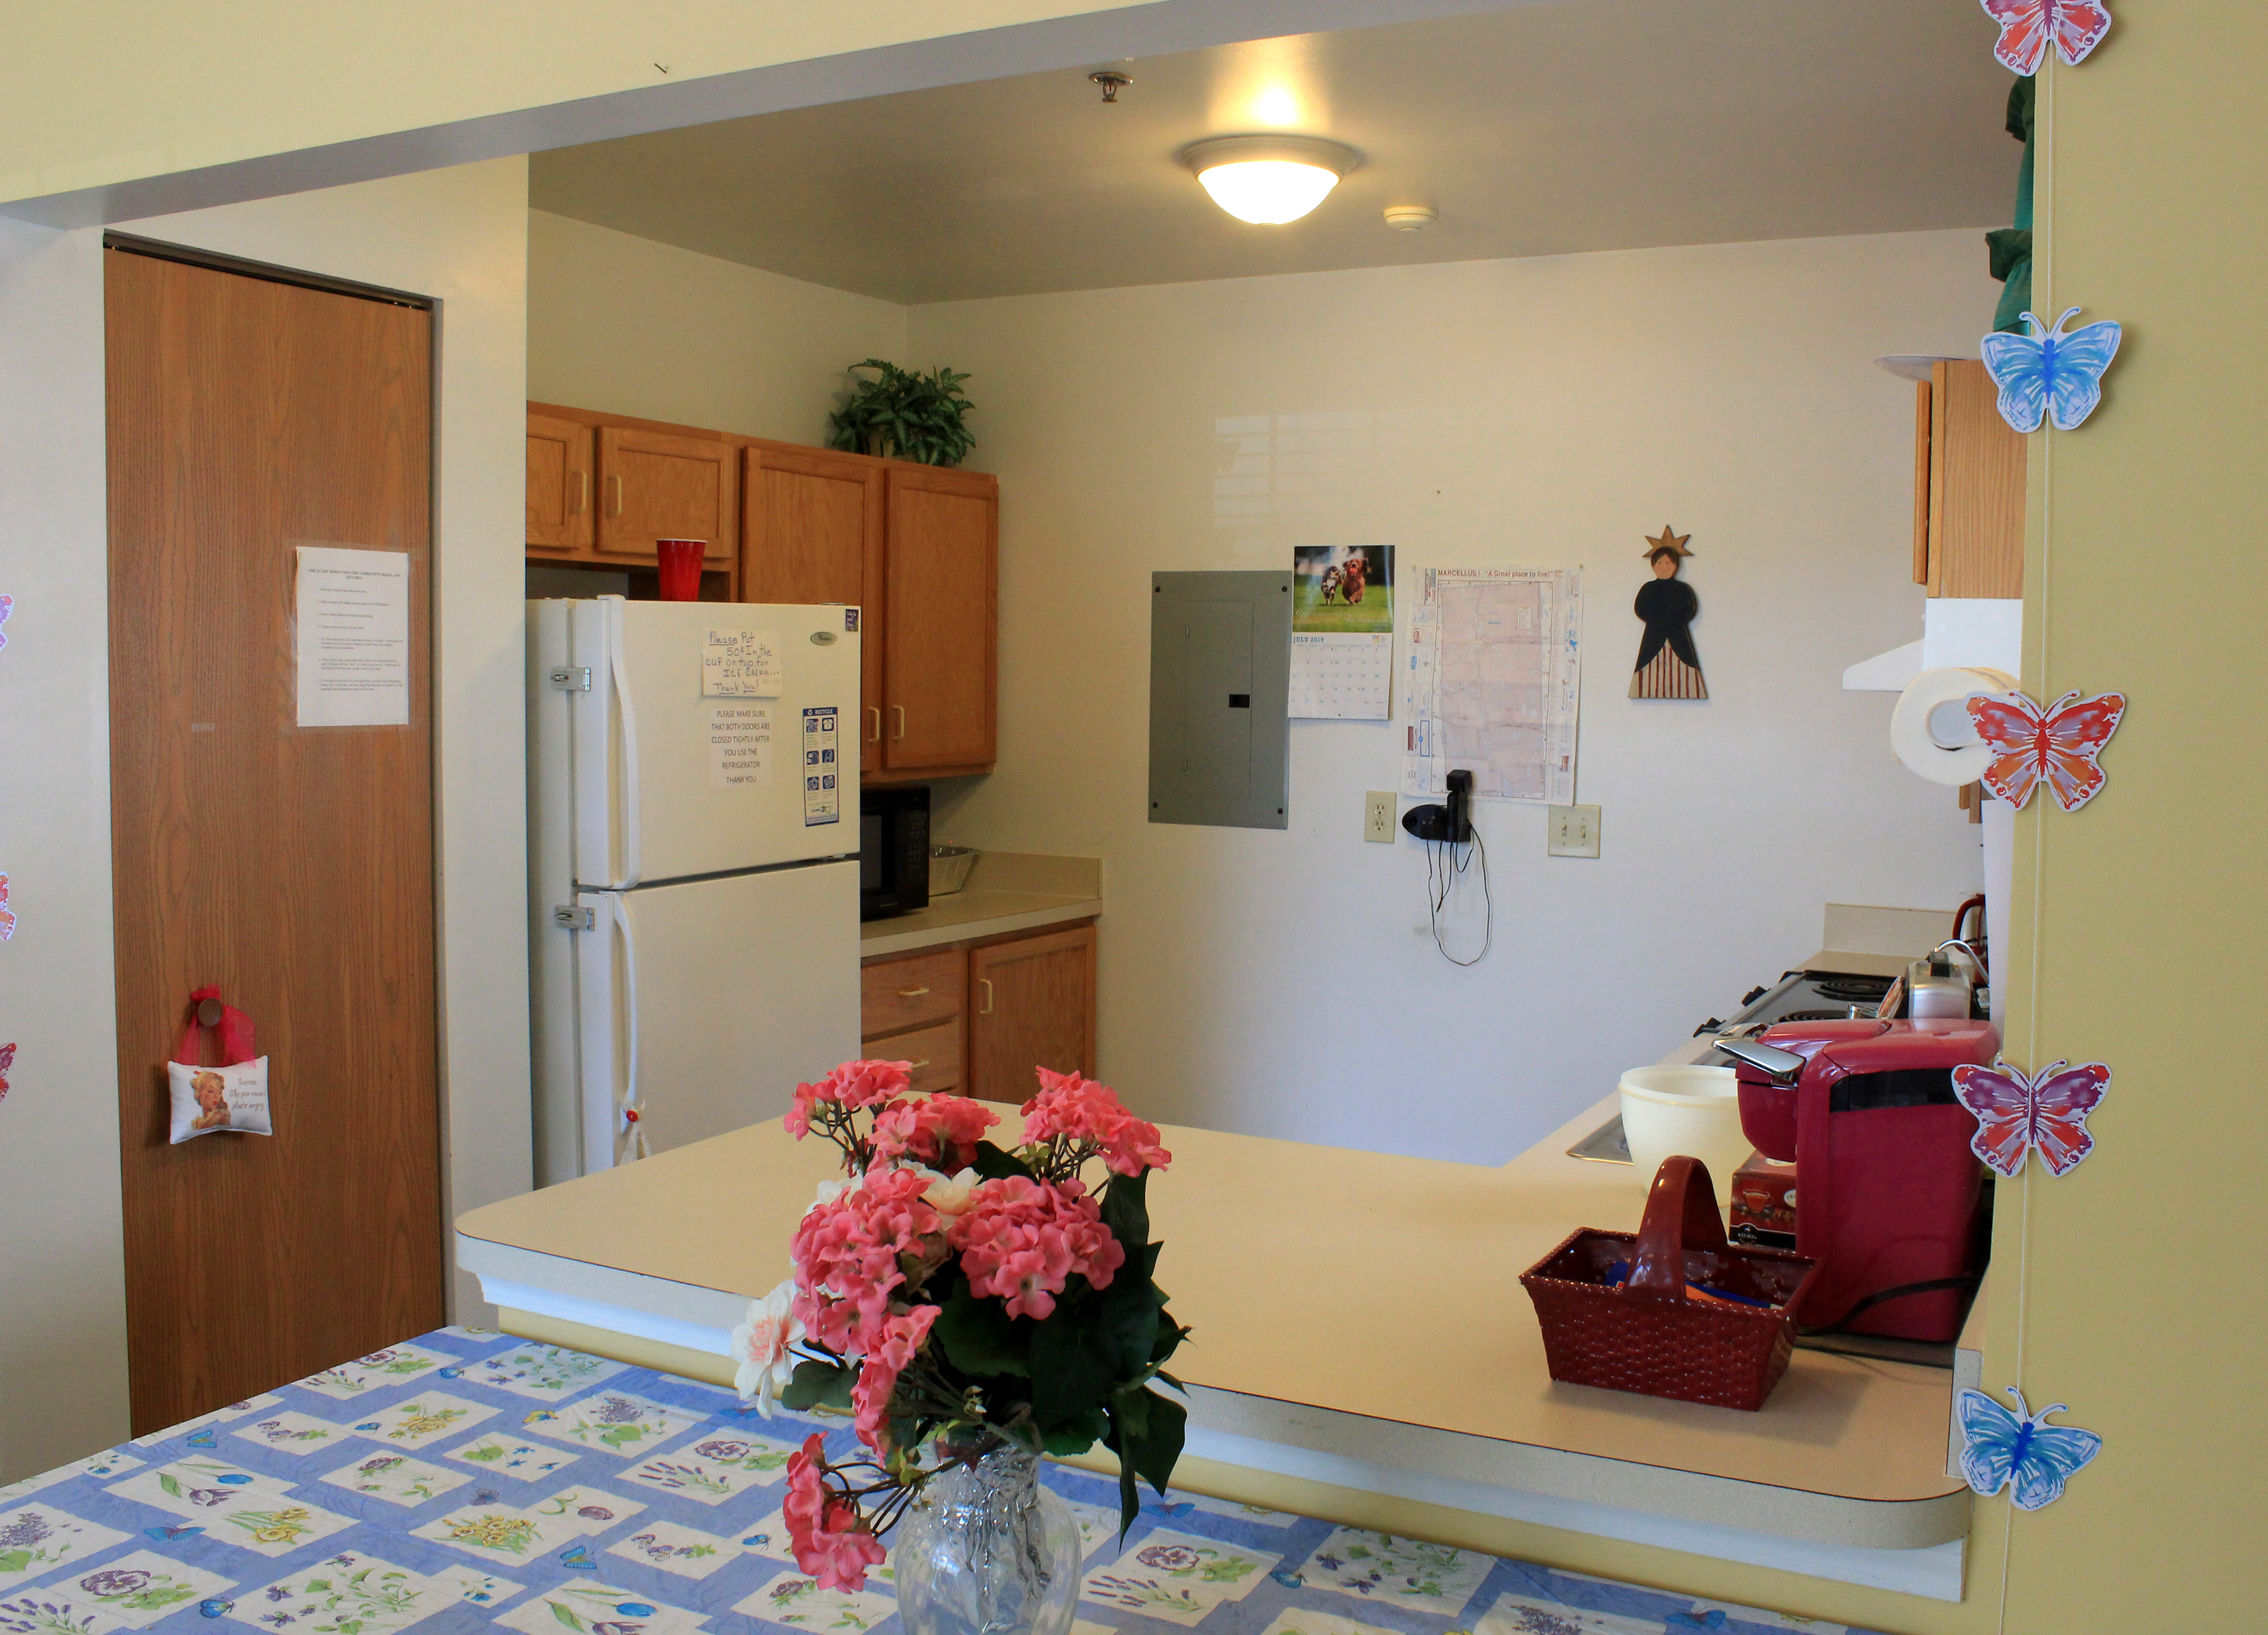 property management company client list syracuse ny community room kitchen image of upper crown landing apartments